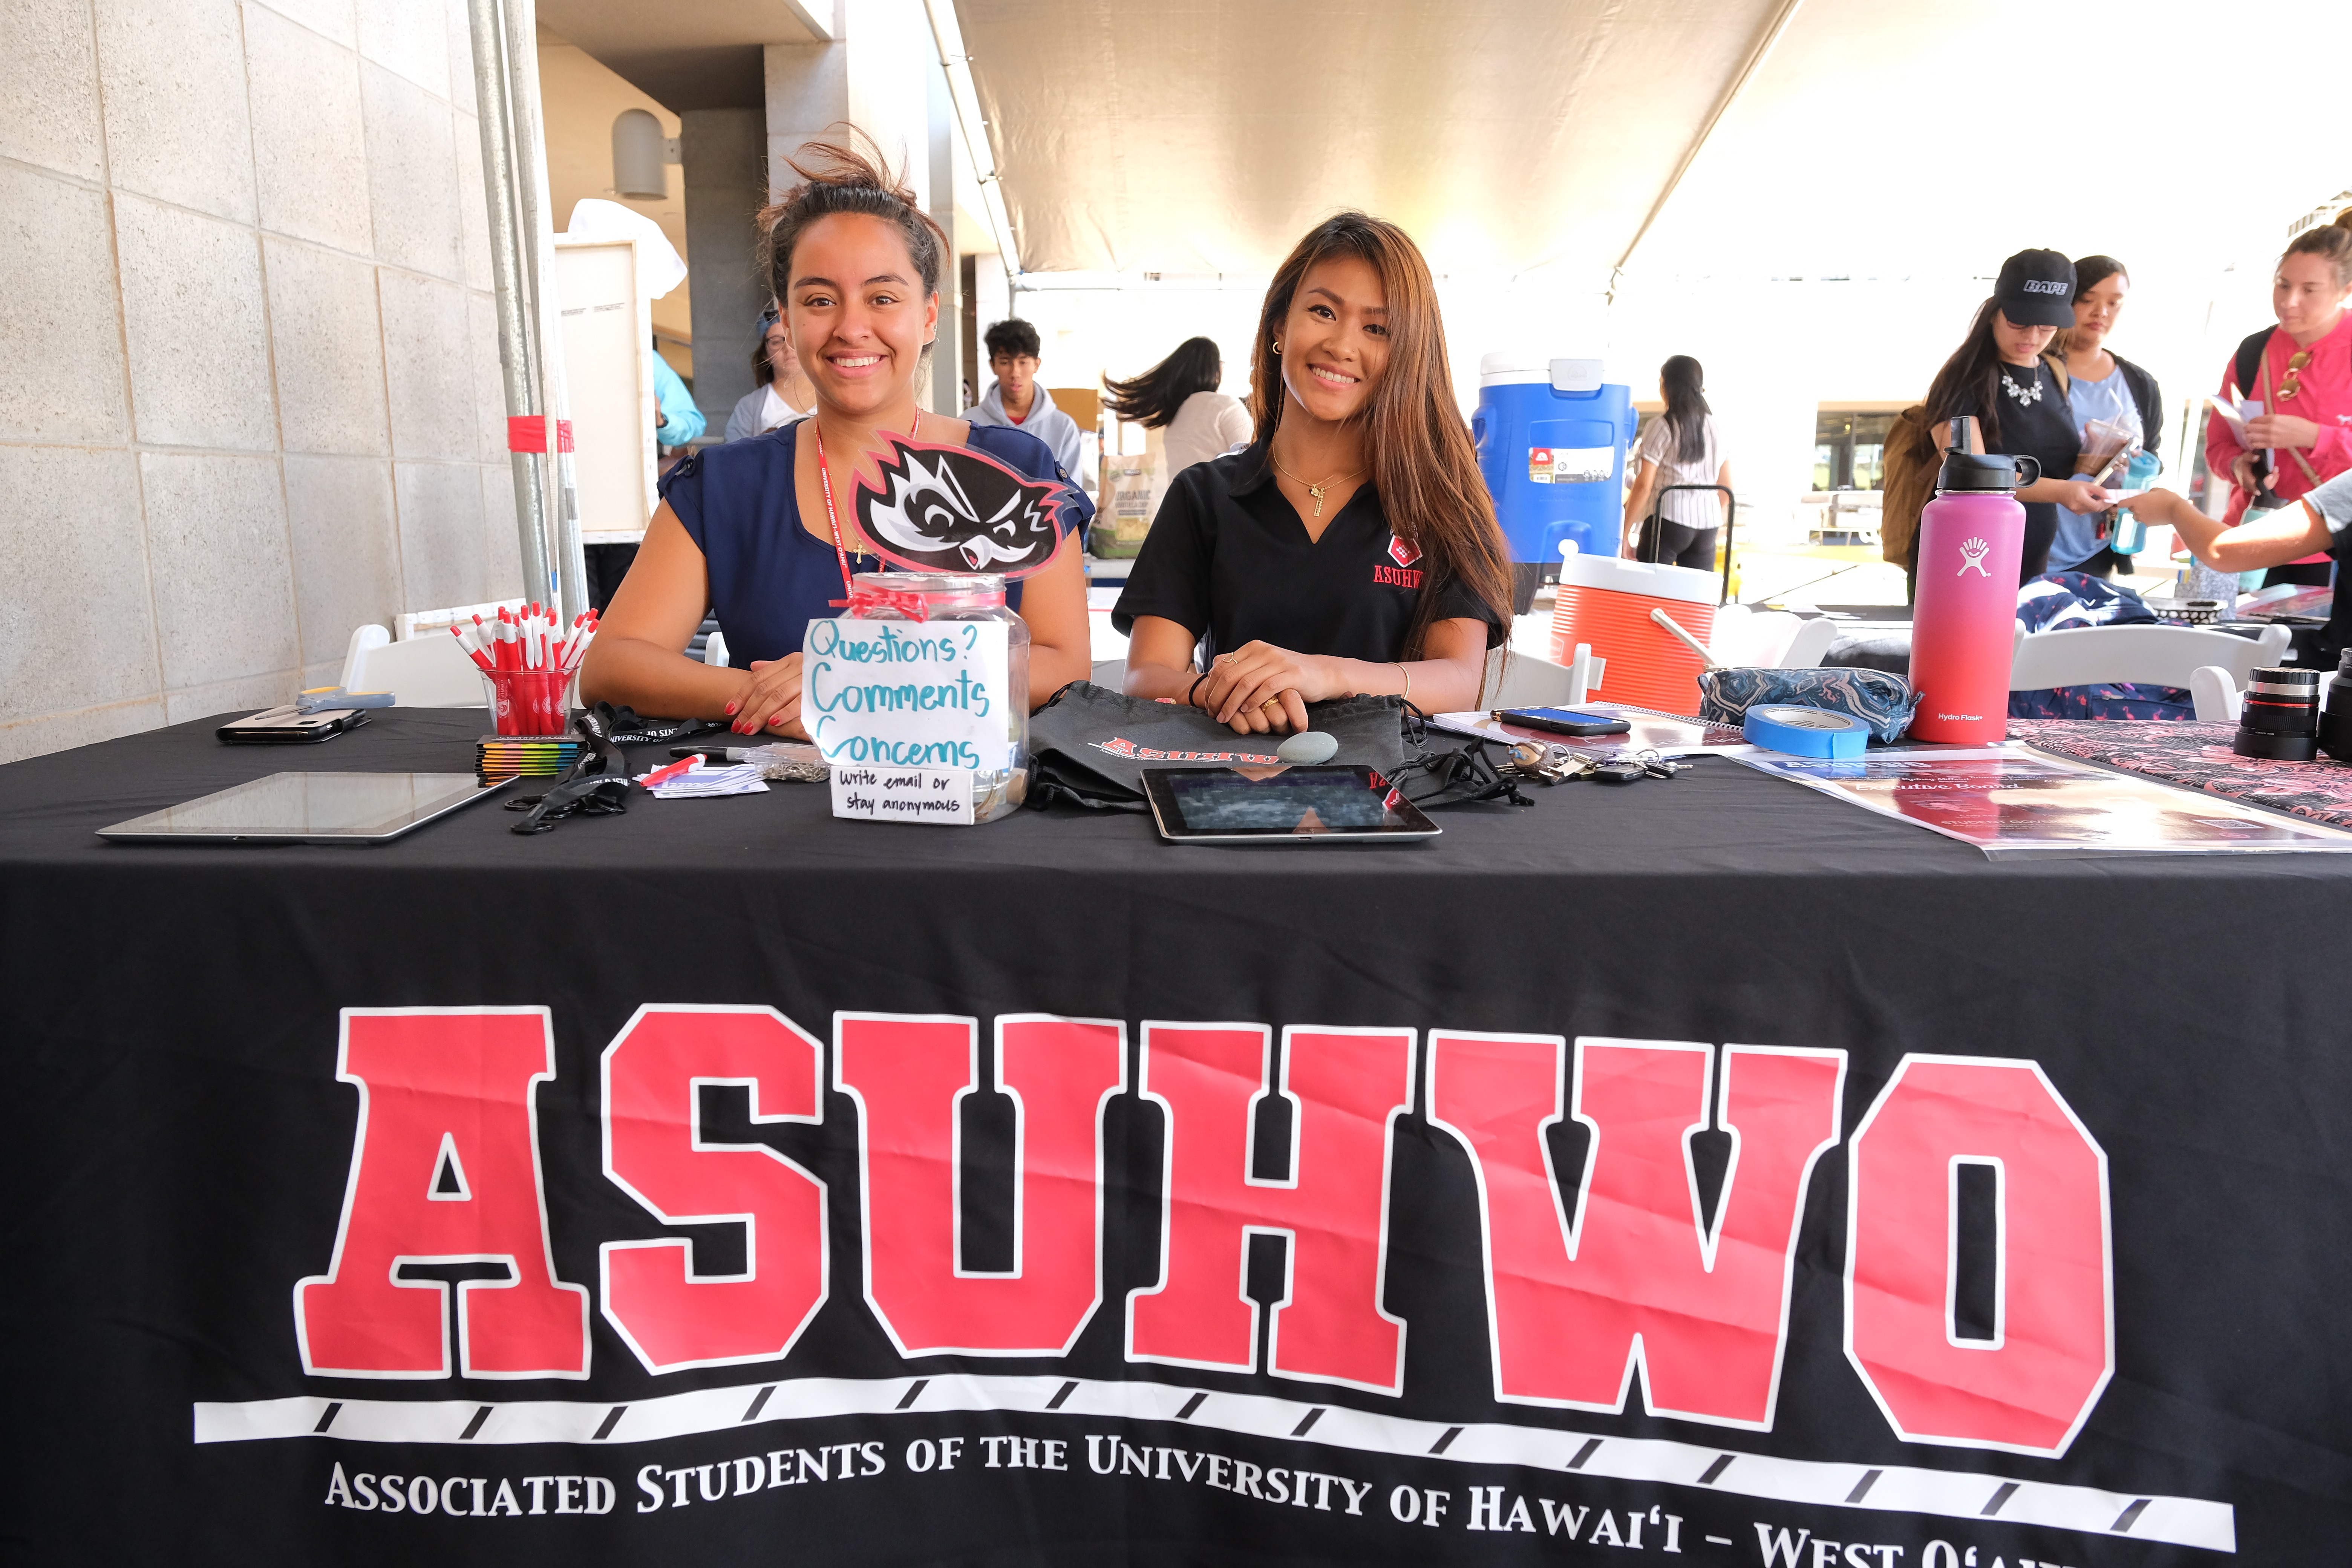 Two female students smiling, sitting at a table to promote the Associated Students of the University of Hawaii-West Oahu.